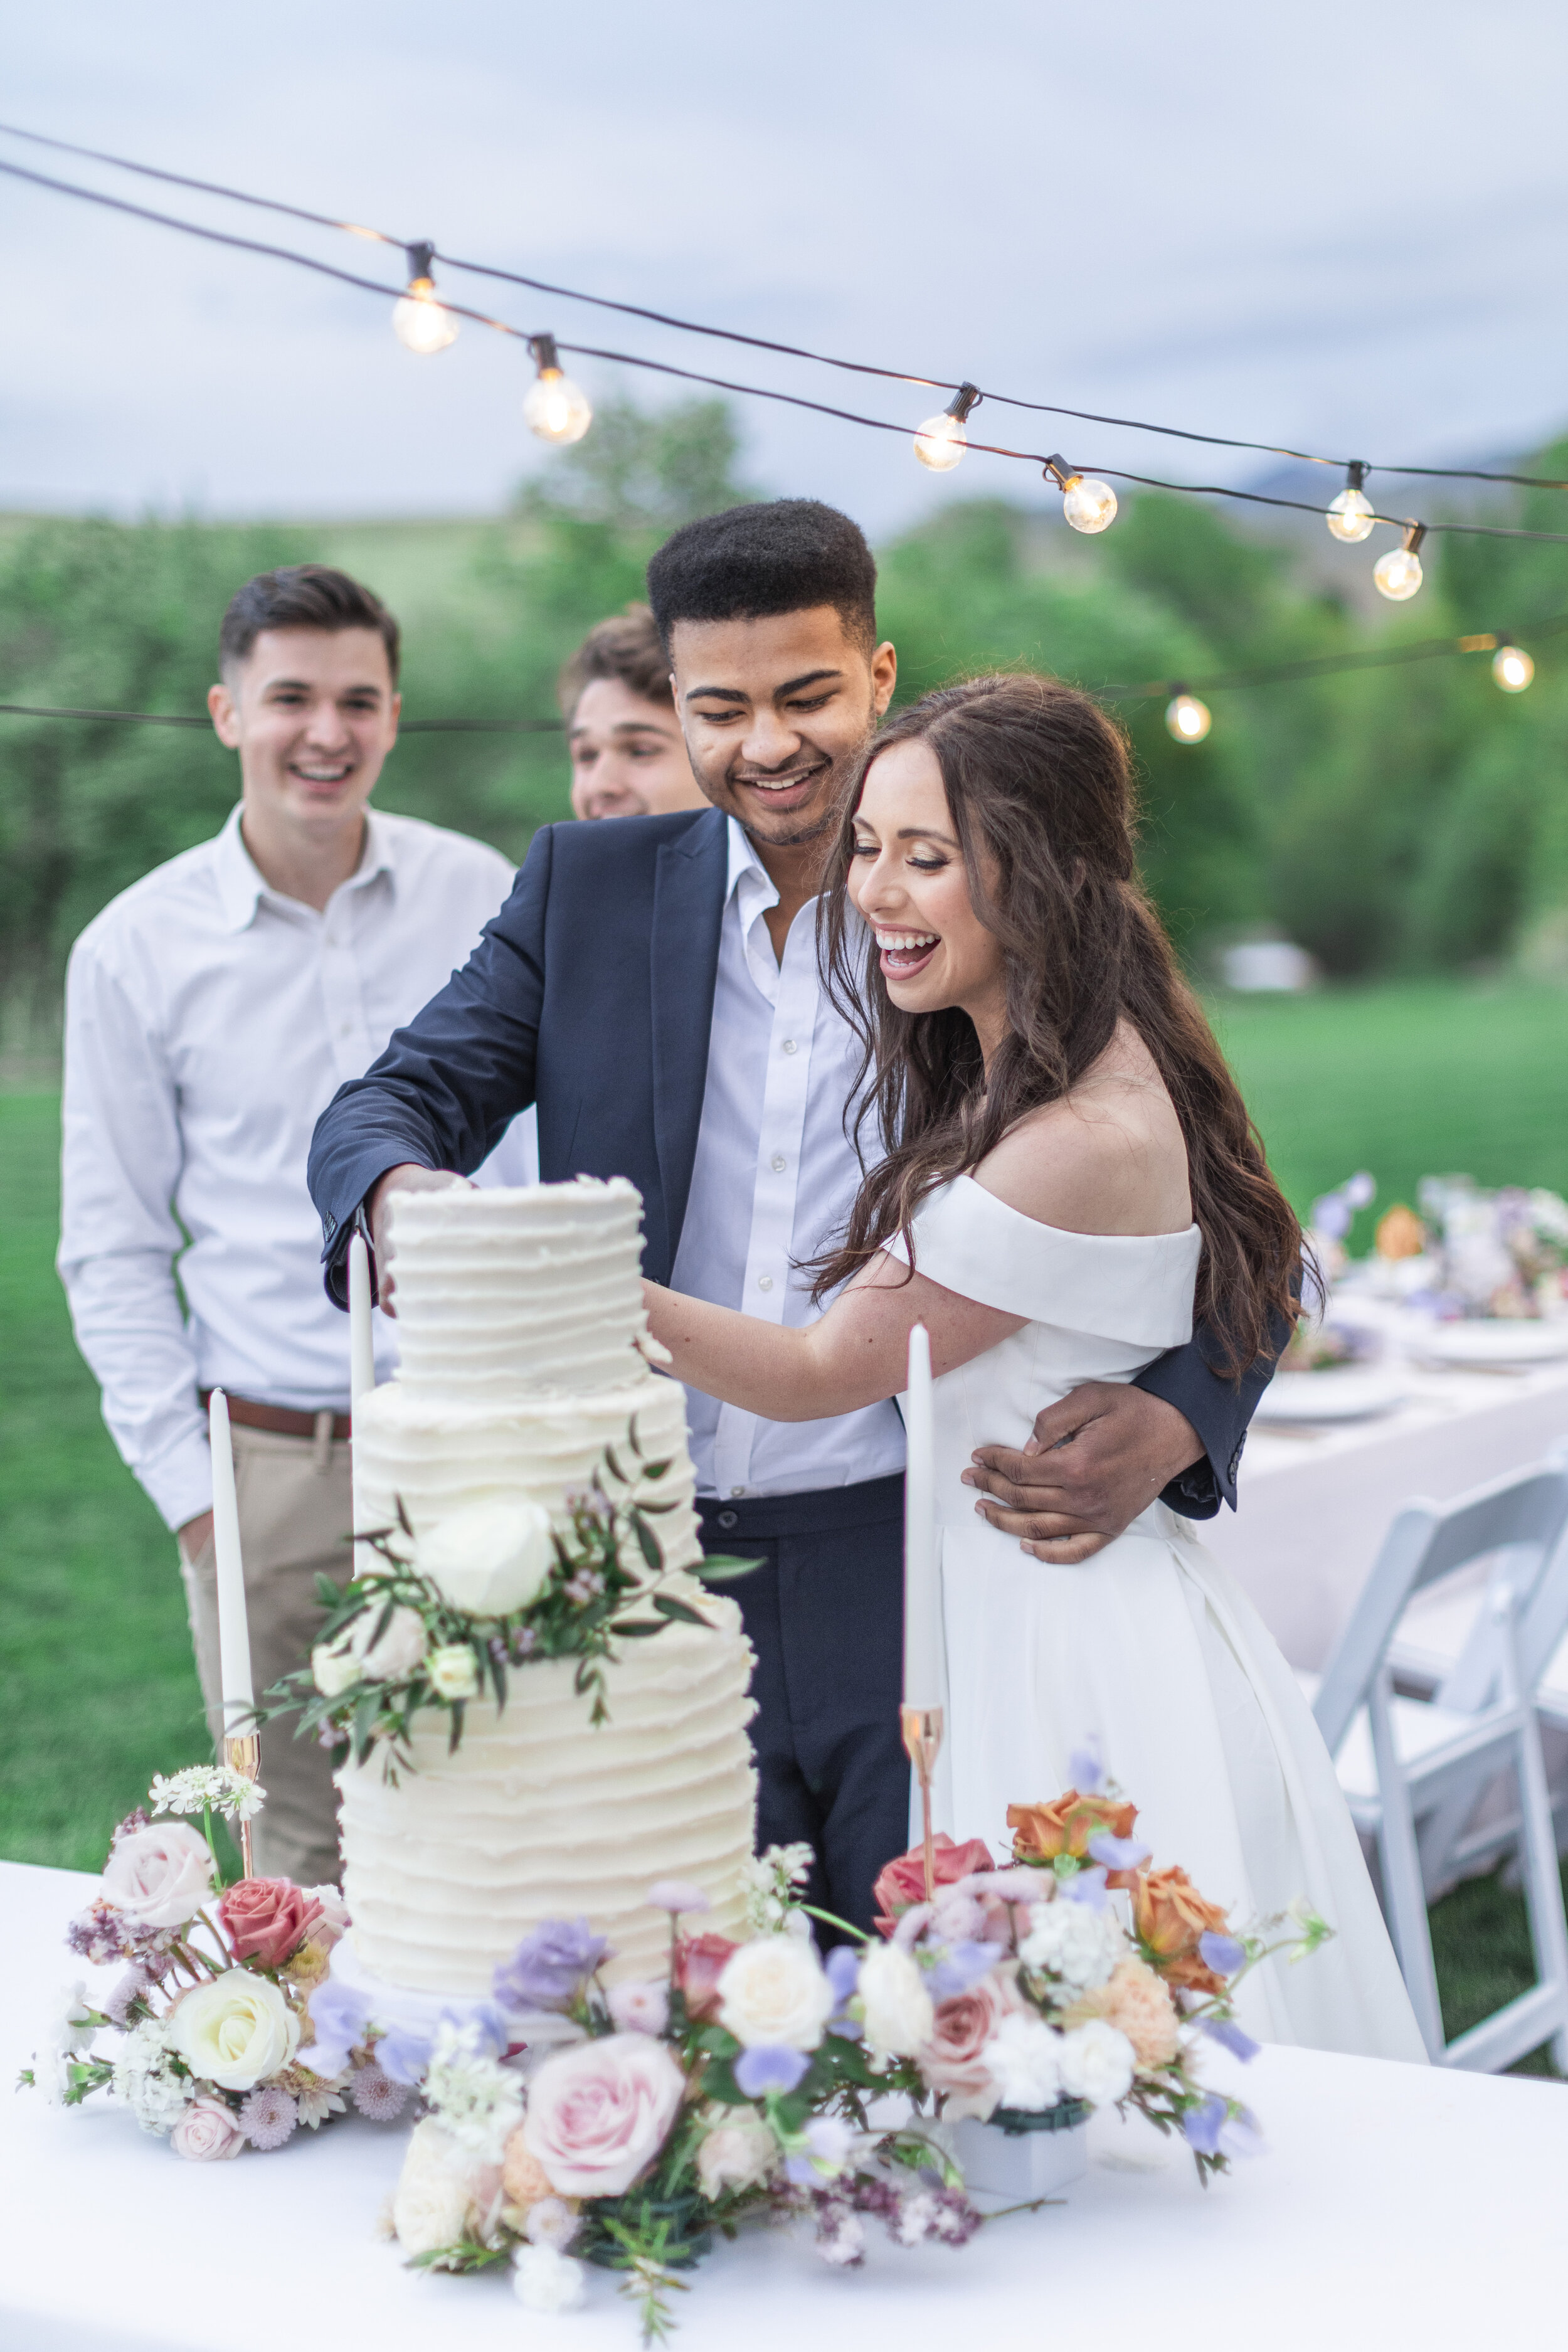  Clarity Lane Photography captures a photo of the bride and groom cutting the wedding cake together during a workshop where she helps other photographers learn tips in Cache Valley Utah. cut the wedding cake wedding day workshop #claritylanephotograp